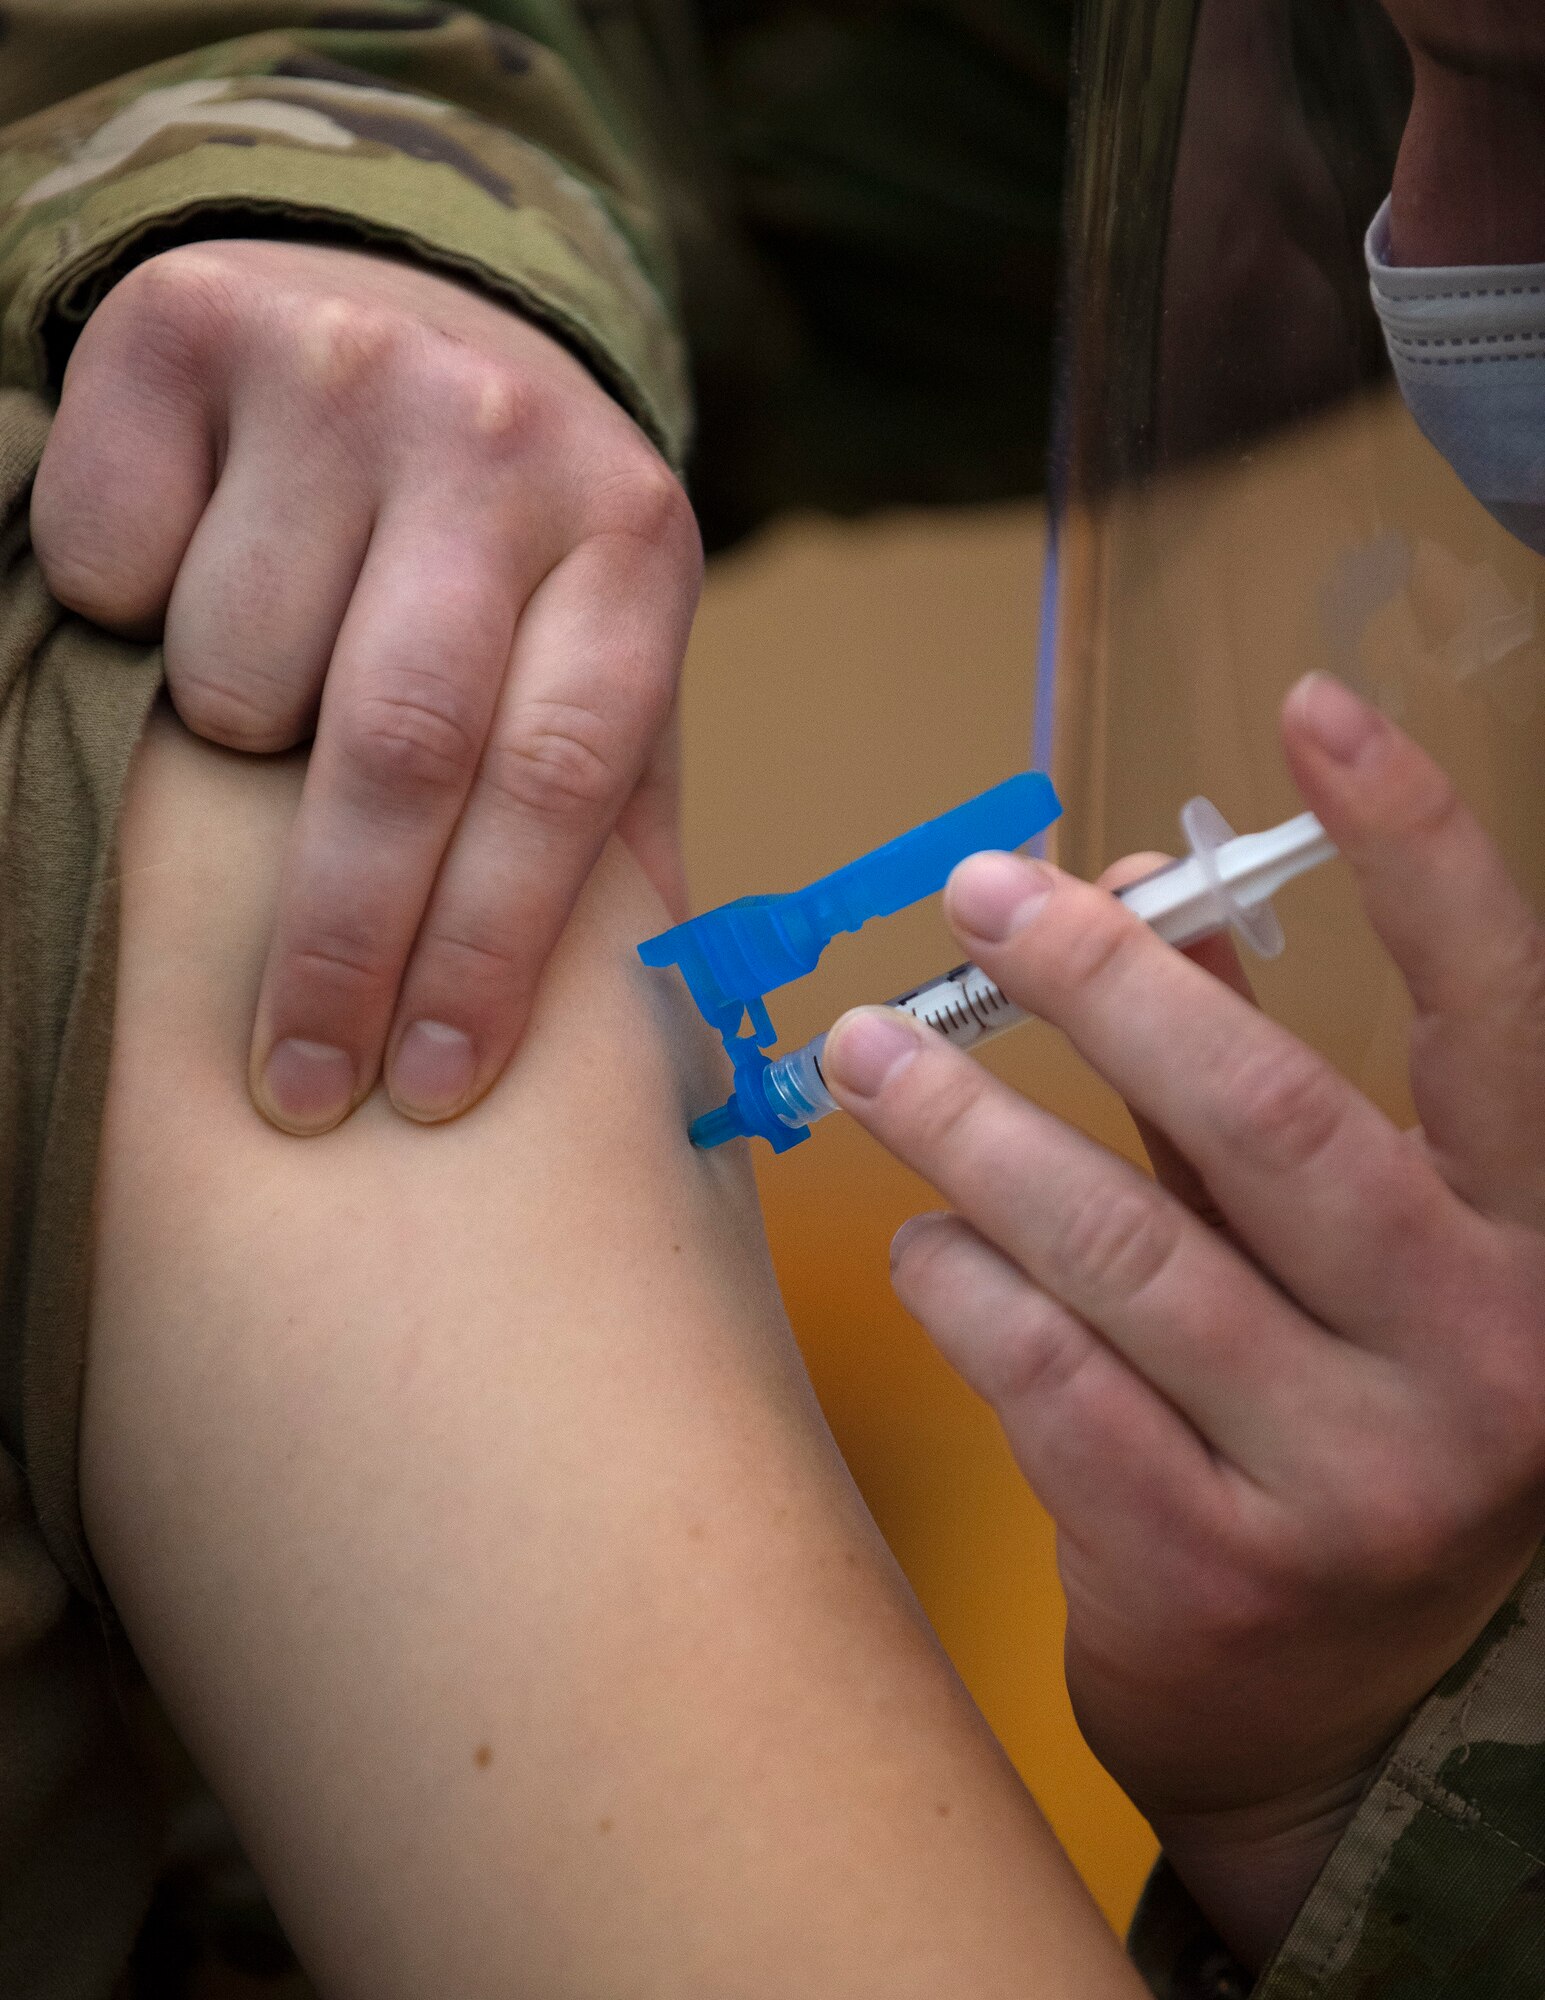 U.S. Air Force Airmen from the 133rd Airlift Wing received their first dose of the Moderna COVID-19 vaccine in St. Paul, Minn., Jan. 8, 2021.